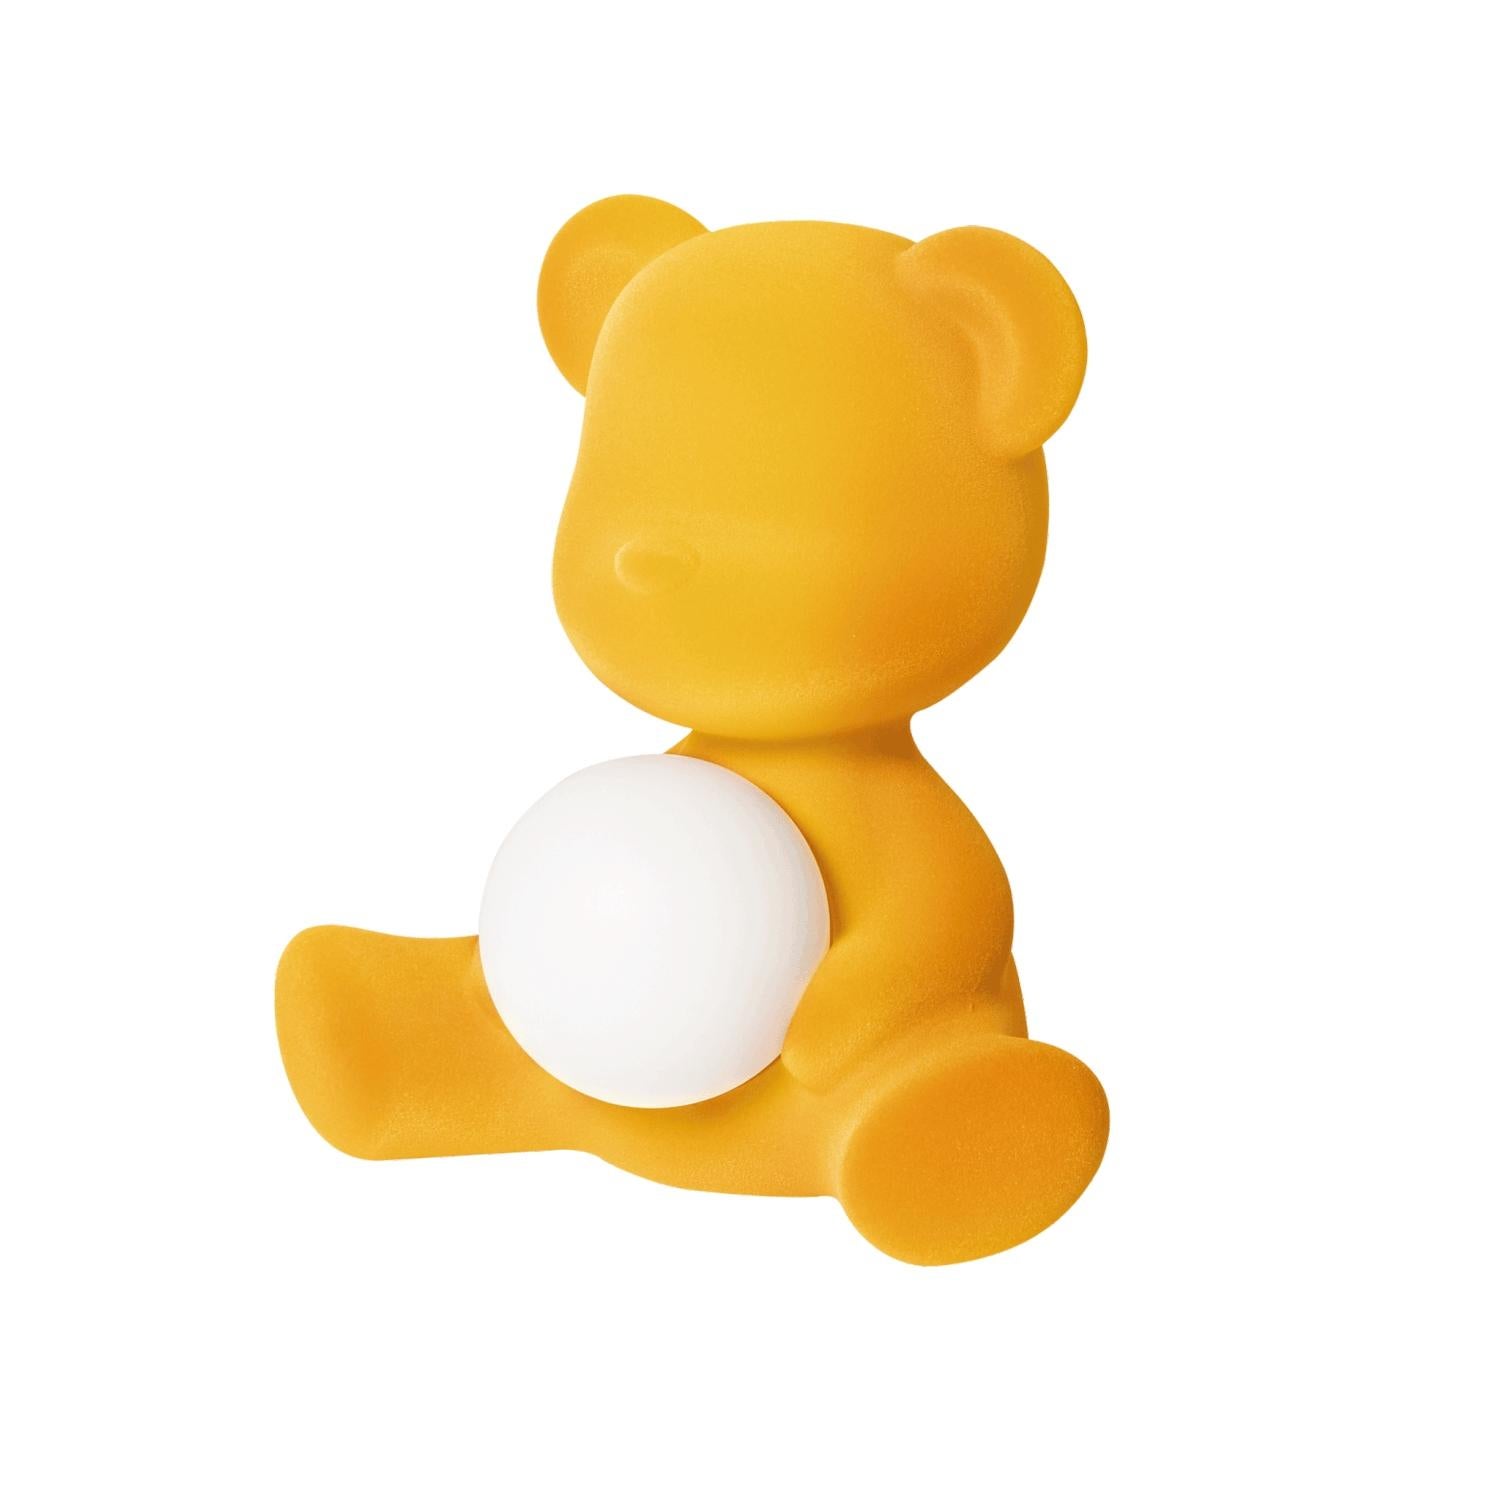 The teddy bear, the emotional object par excellence, is reinterpreted by Stefano Giovannoni and becomes a table lamp. This new pop icon is tender, and fun at the same time. Teddy girl, timid and delicate, brings to light the feminine soul of the